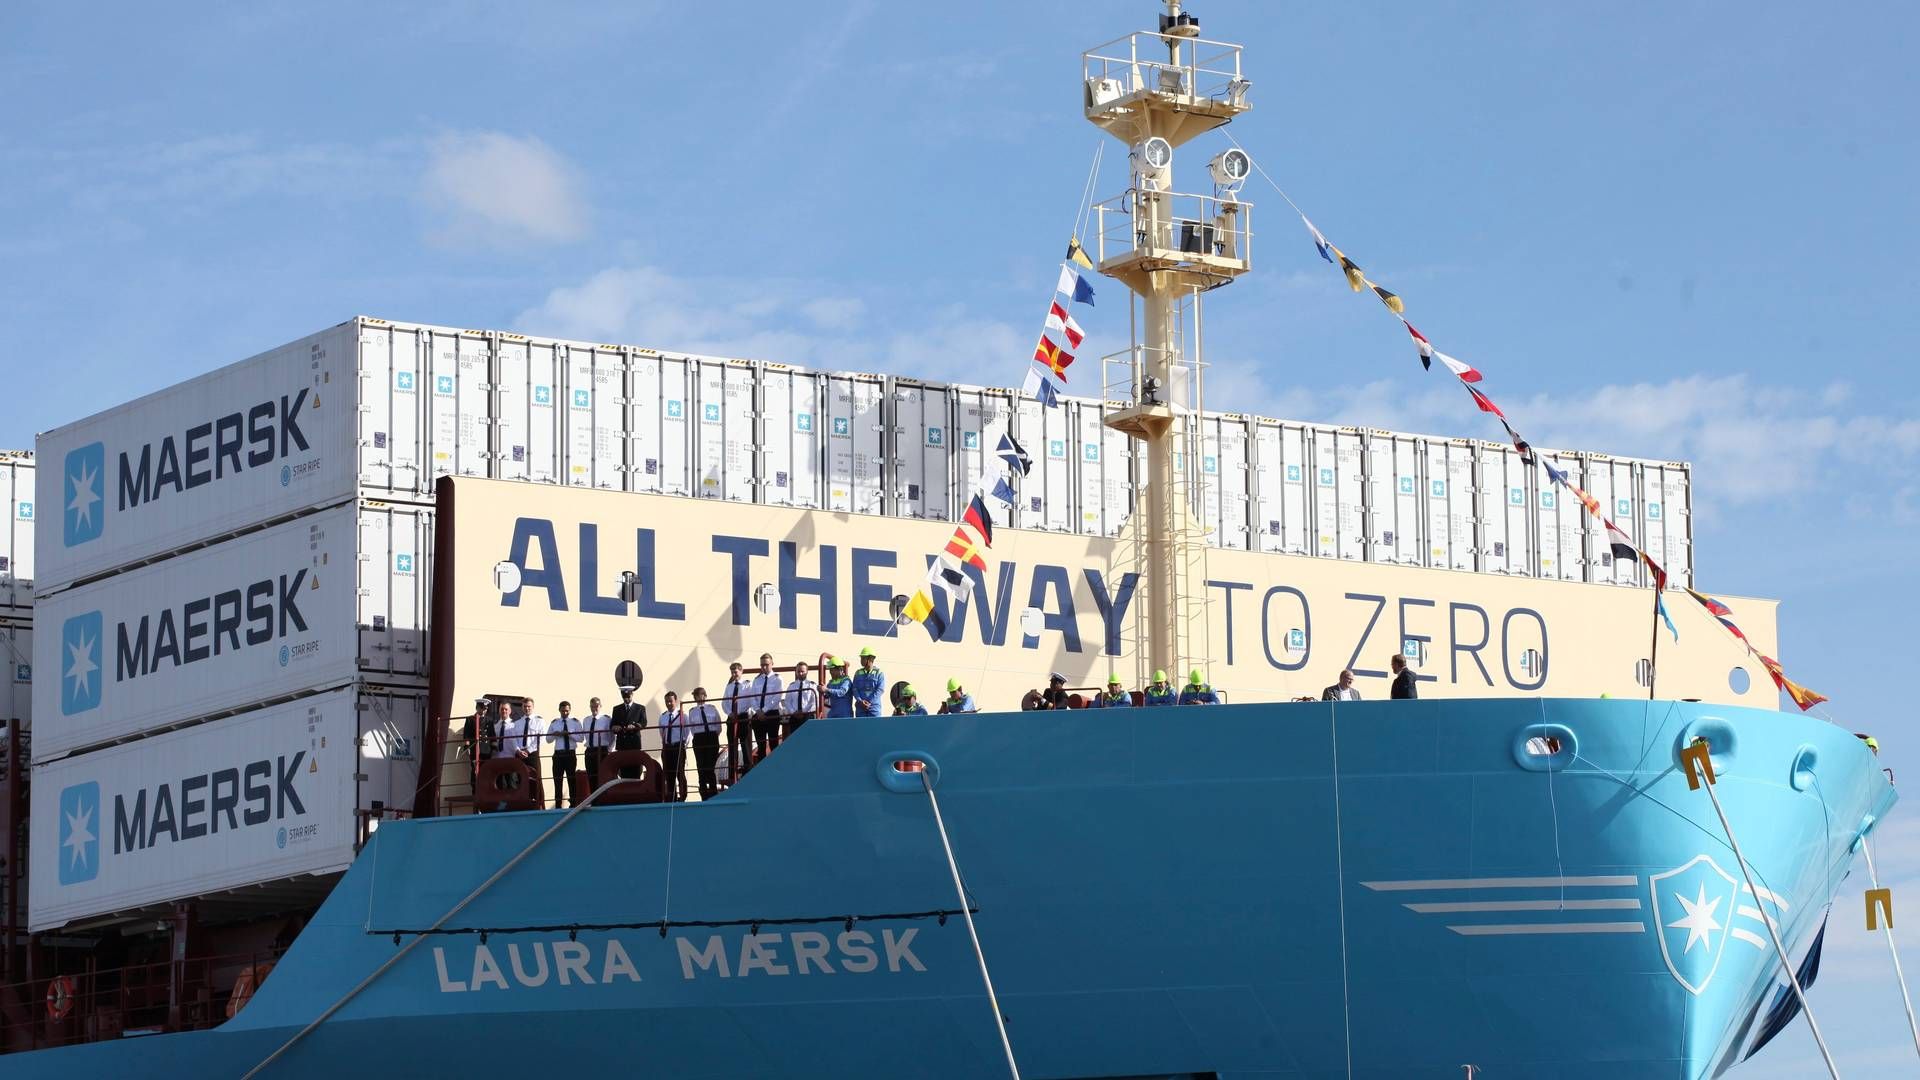 In connection with the christening of Maersk's first methanol-ready ship, the Laura Maersk, A.P. Moller Holding also established the company C2X which will contribute to producing three million tonnes of green methanol annually from 2030. | Photo: Steffen Trumpf/AP/Ritzau Scanpix